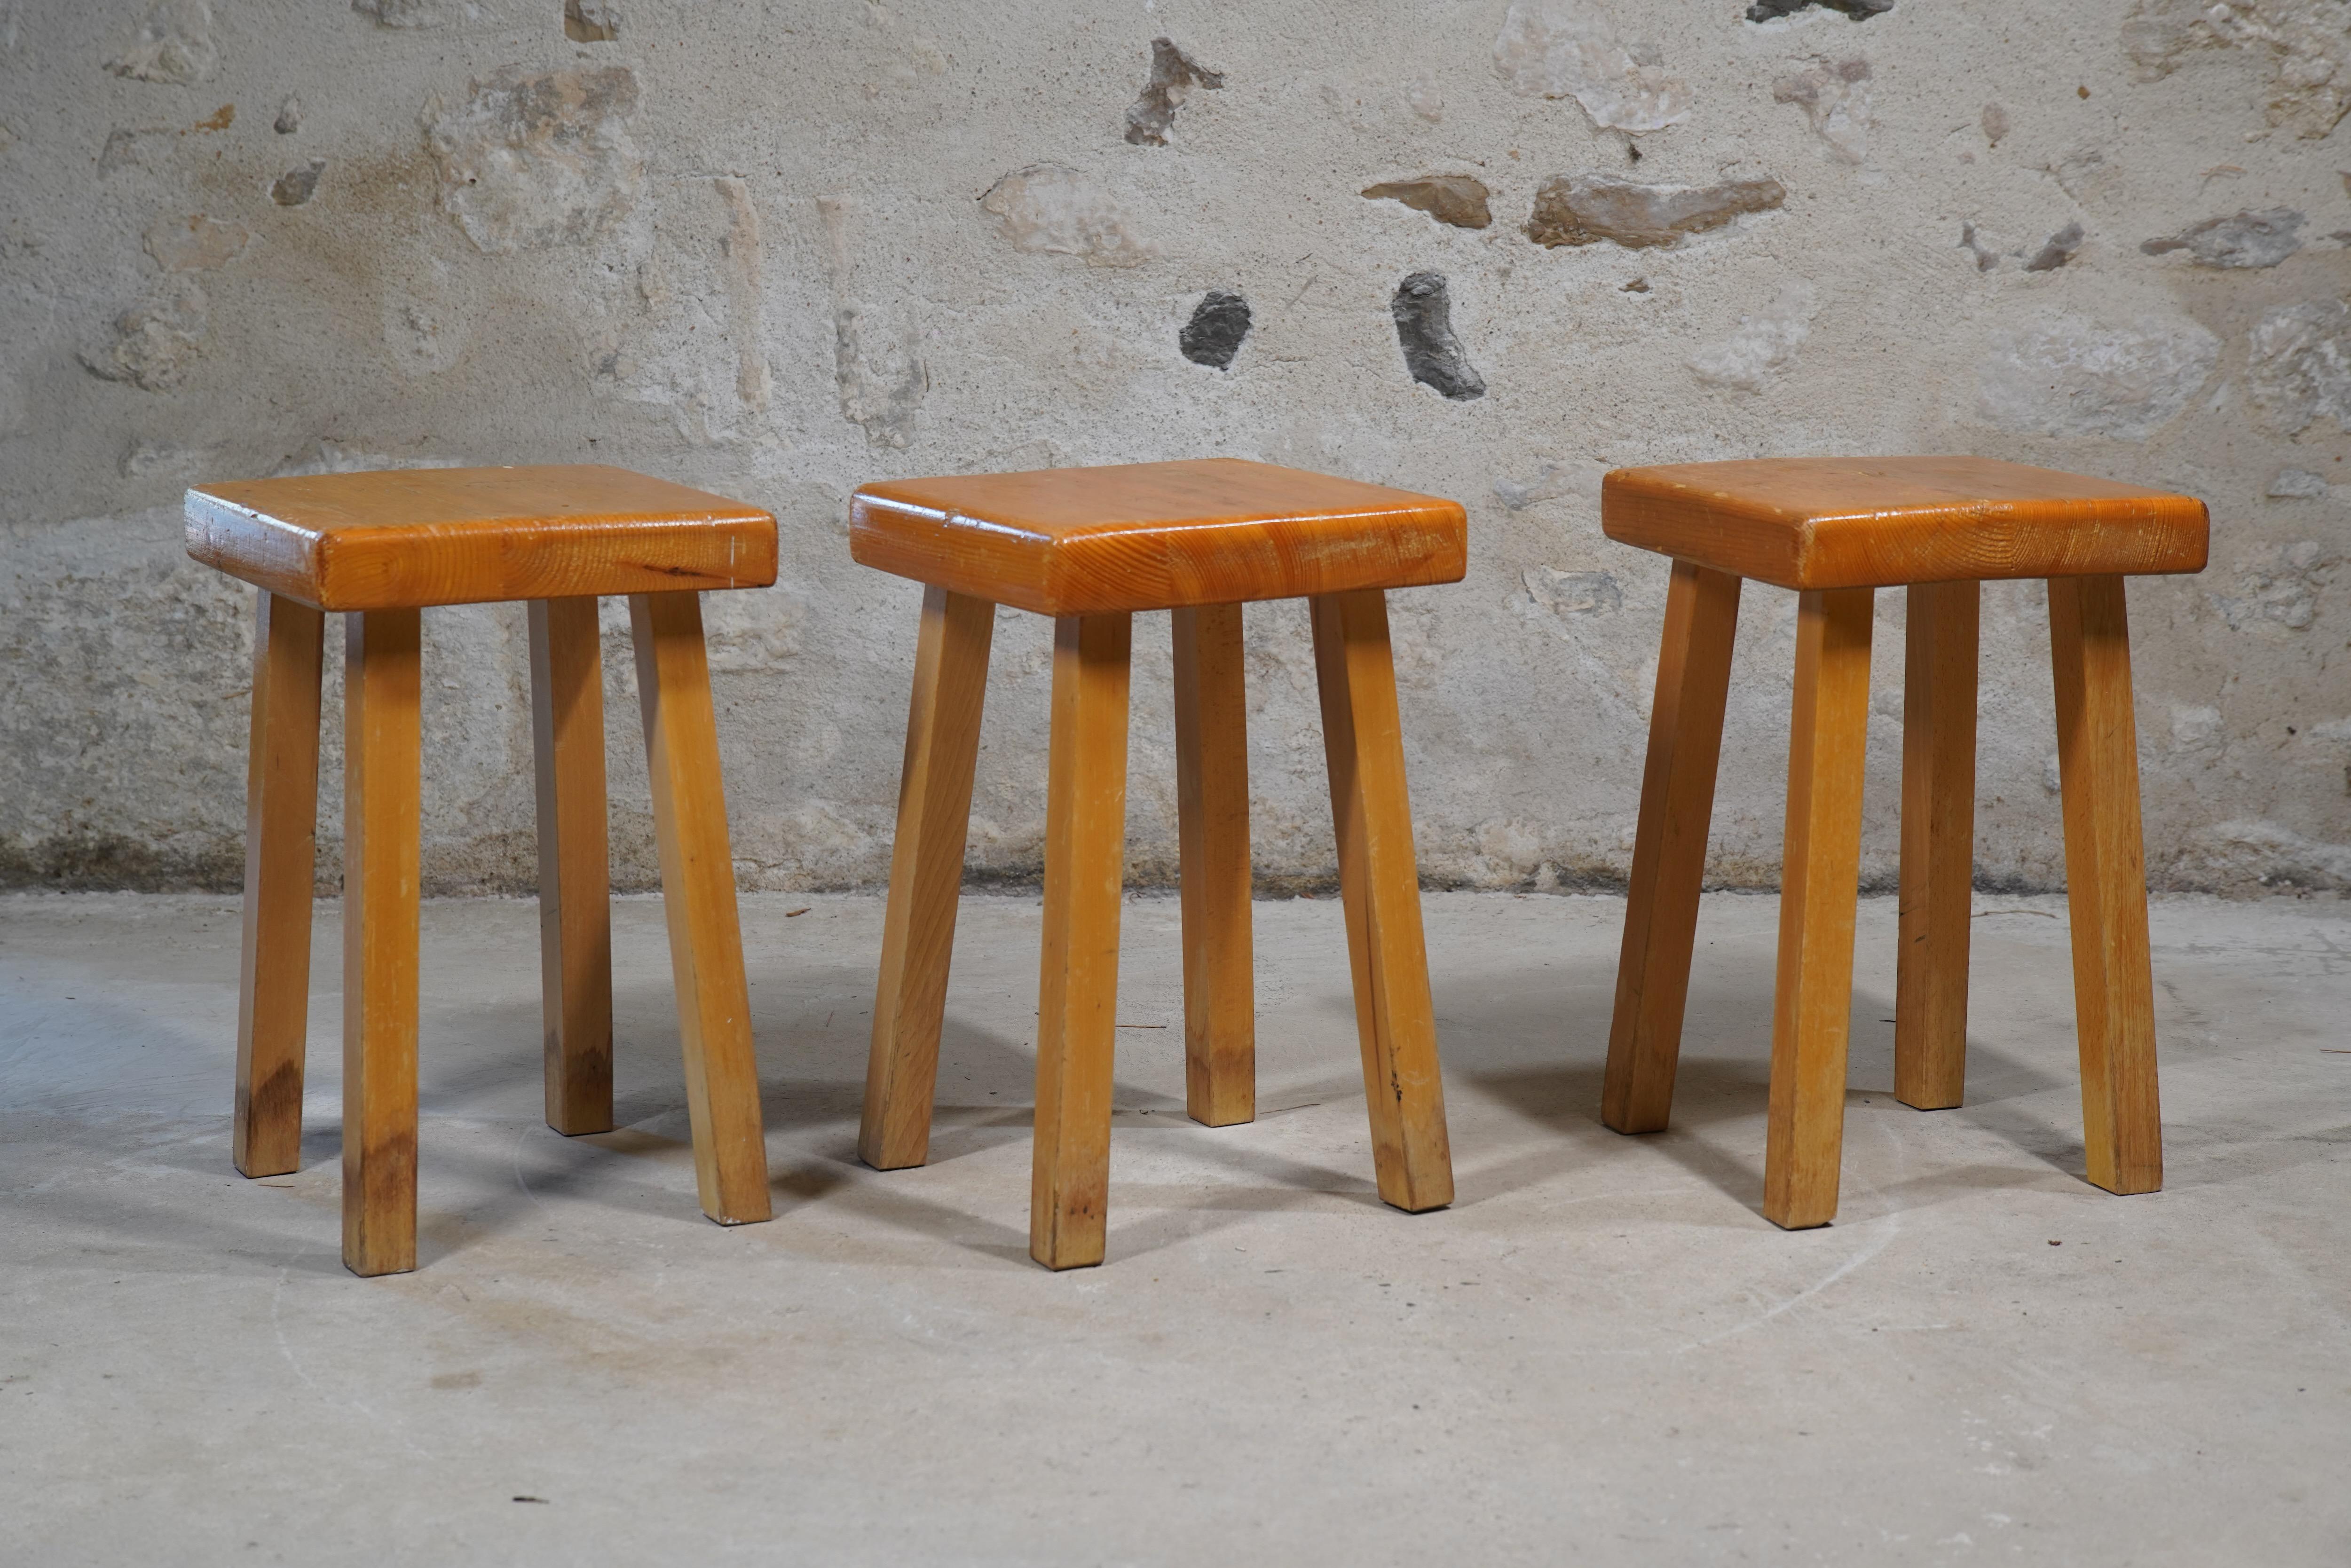 Very rare and beautiful stools designed by acclaimed architect and designer Charlotte Perriand for the ski resort Les Arcs 1800 from 1967 to 1989.

Furniture from Les Arcs is characterised by its clean lines, simplicity, and functionality. The